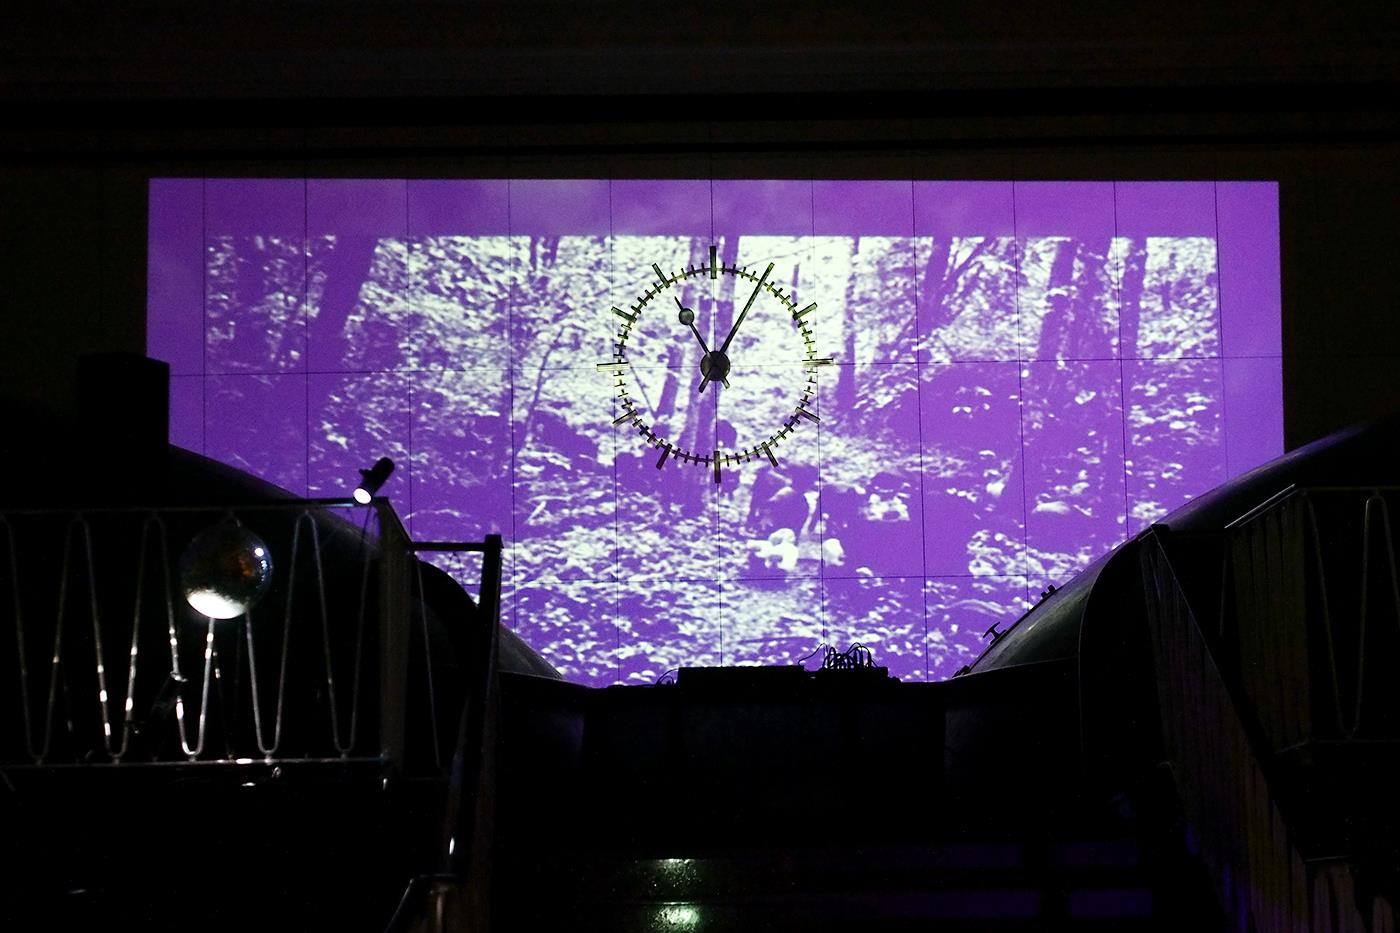 The Seer at The Room of Eyes festival, photography by Flyn Vibert